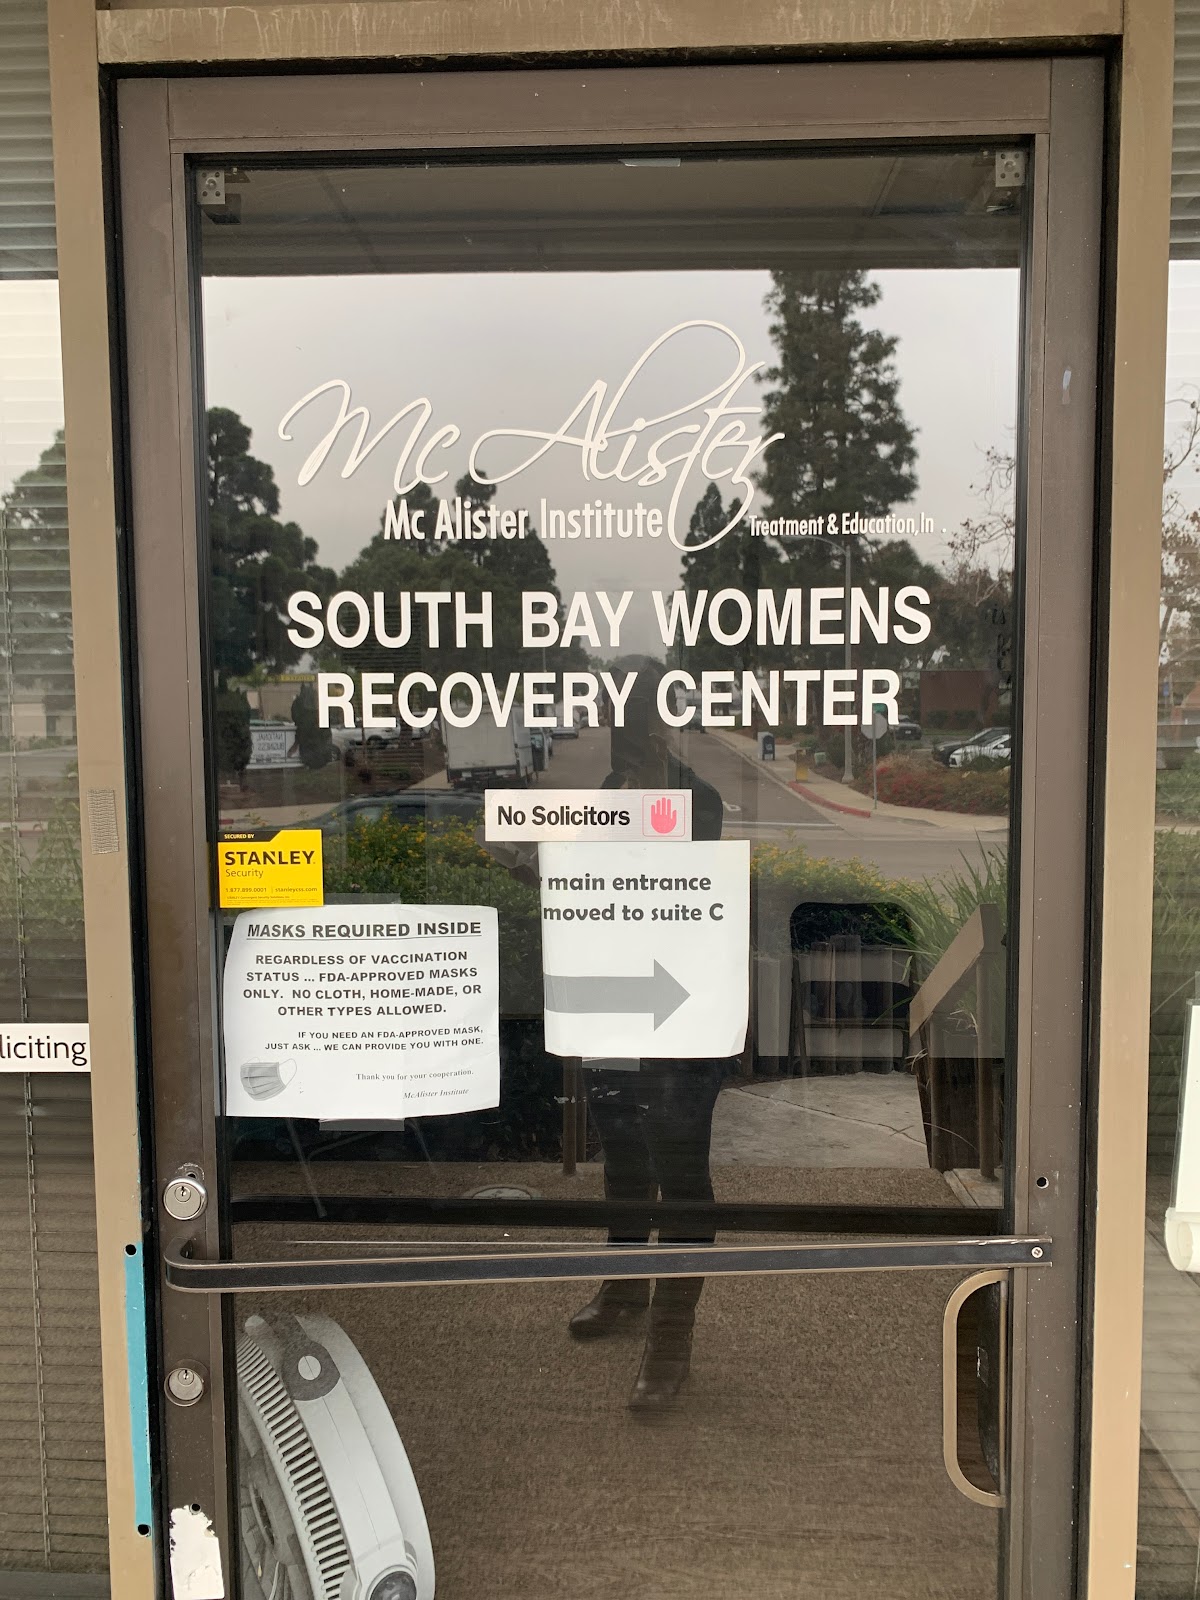 South Bay Women's Recovery Center